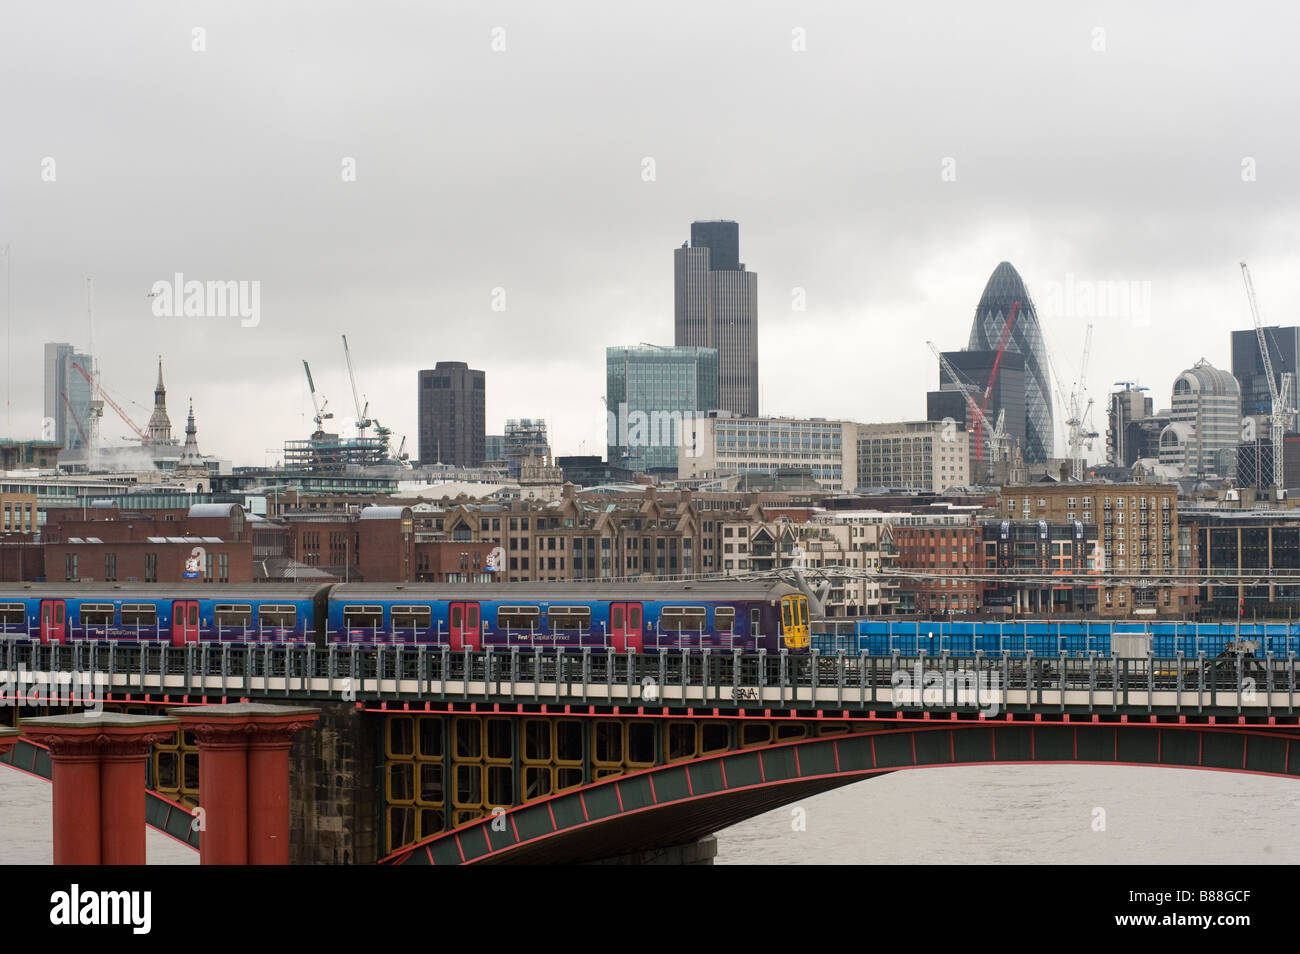 First Capital Connect train passing over the railway bridge at Blackfriars Station in the city of London England Stock Photo